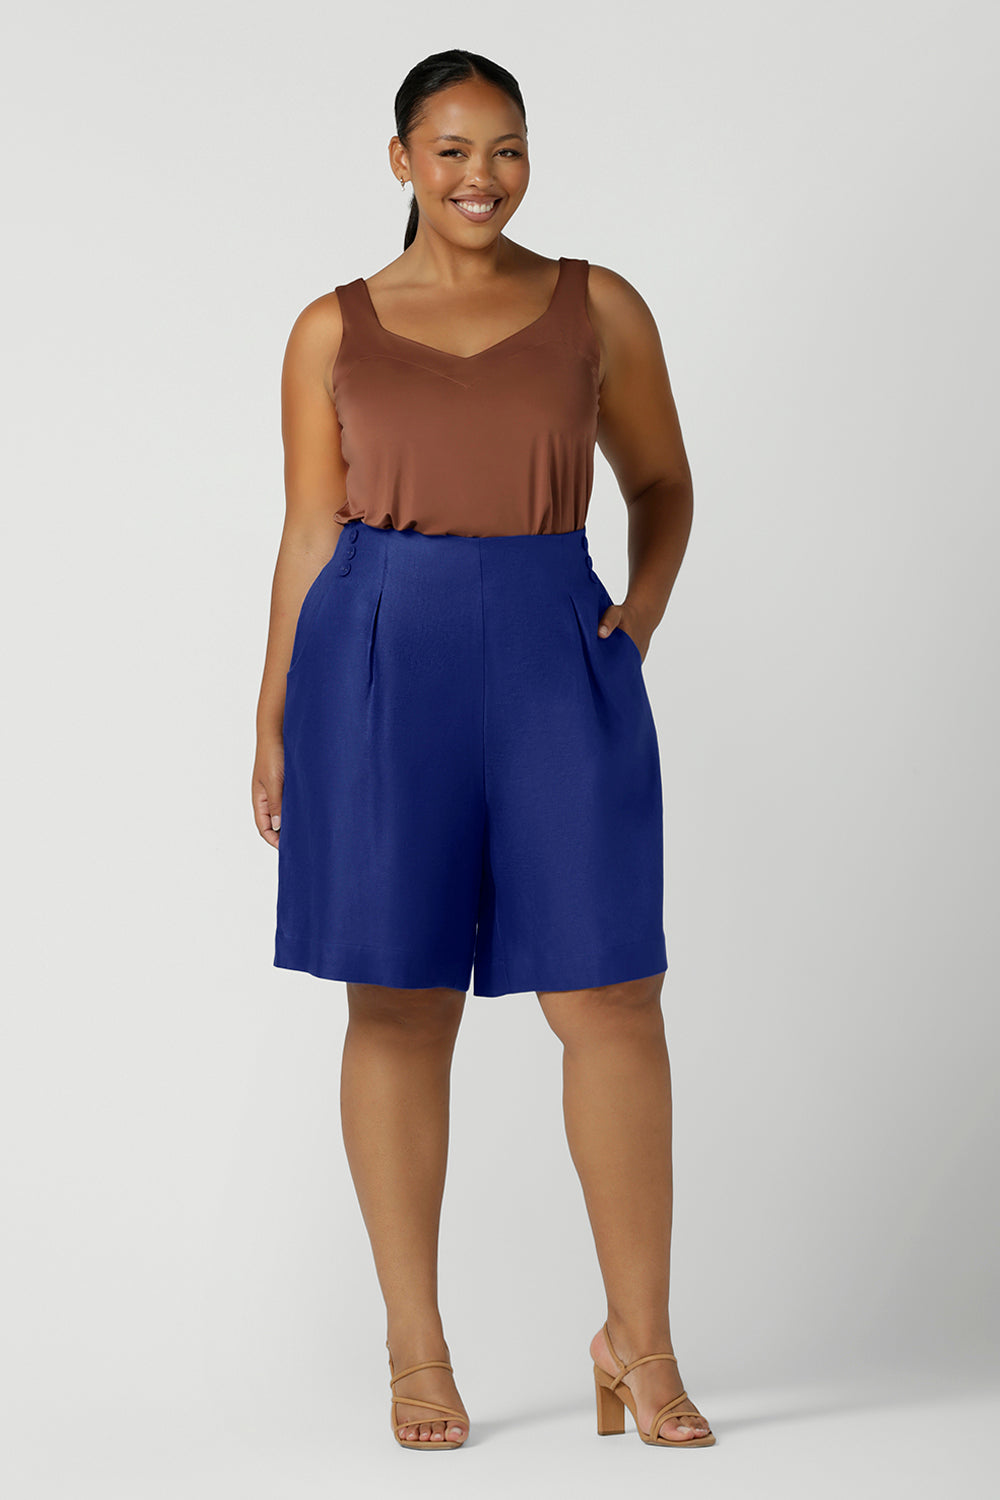 Size 16 woman wears Cobalt Linen Bermuda short  in Cobalt. High waist short with pleat front and self cover buttons. Bermuda short length. Made in Australia for women size 8 - 24.